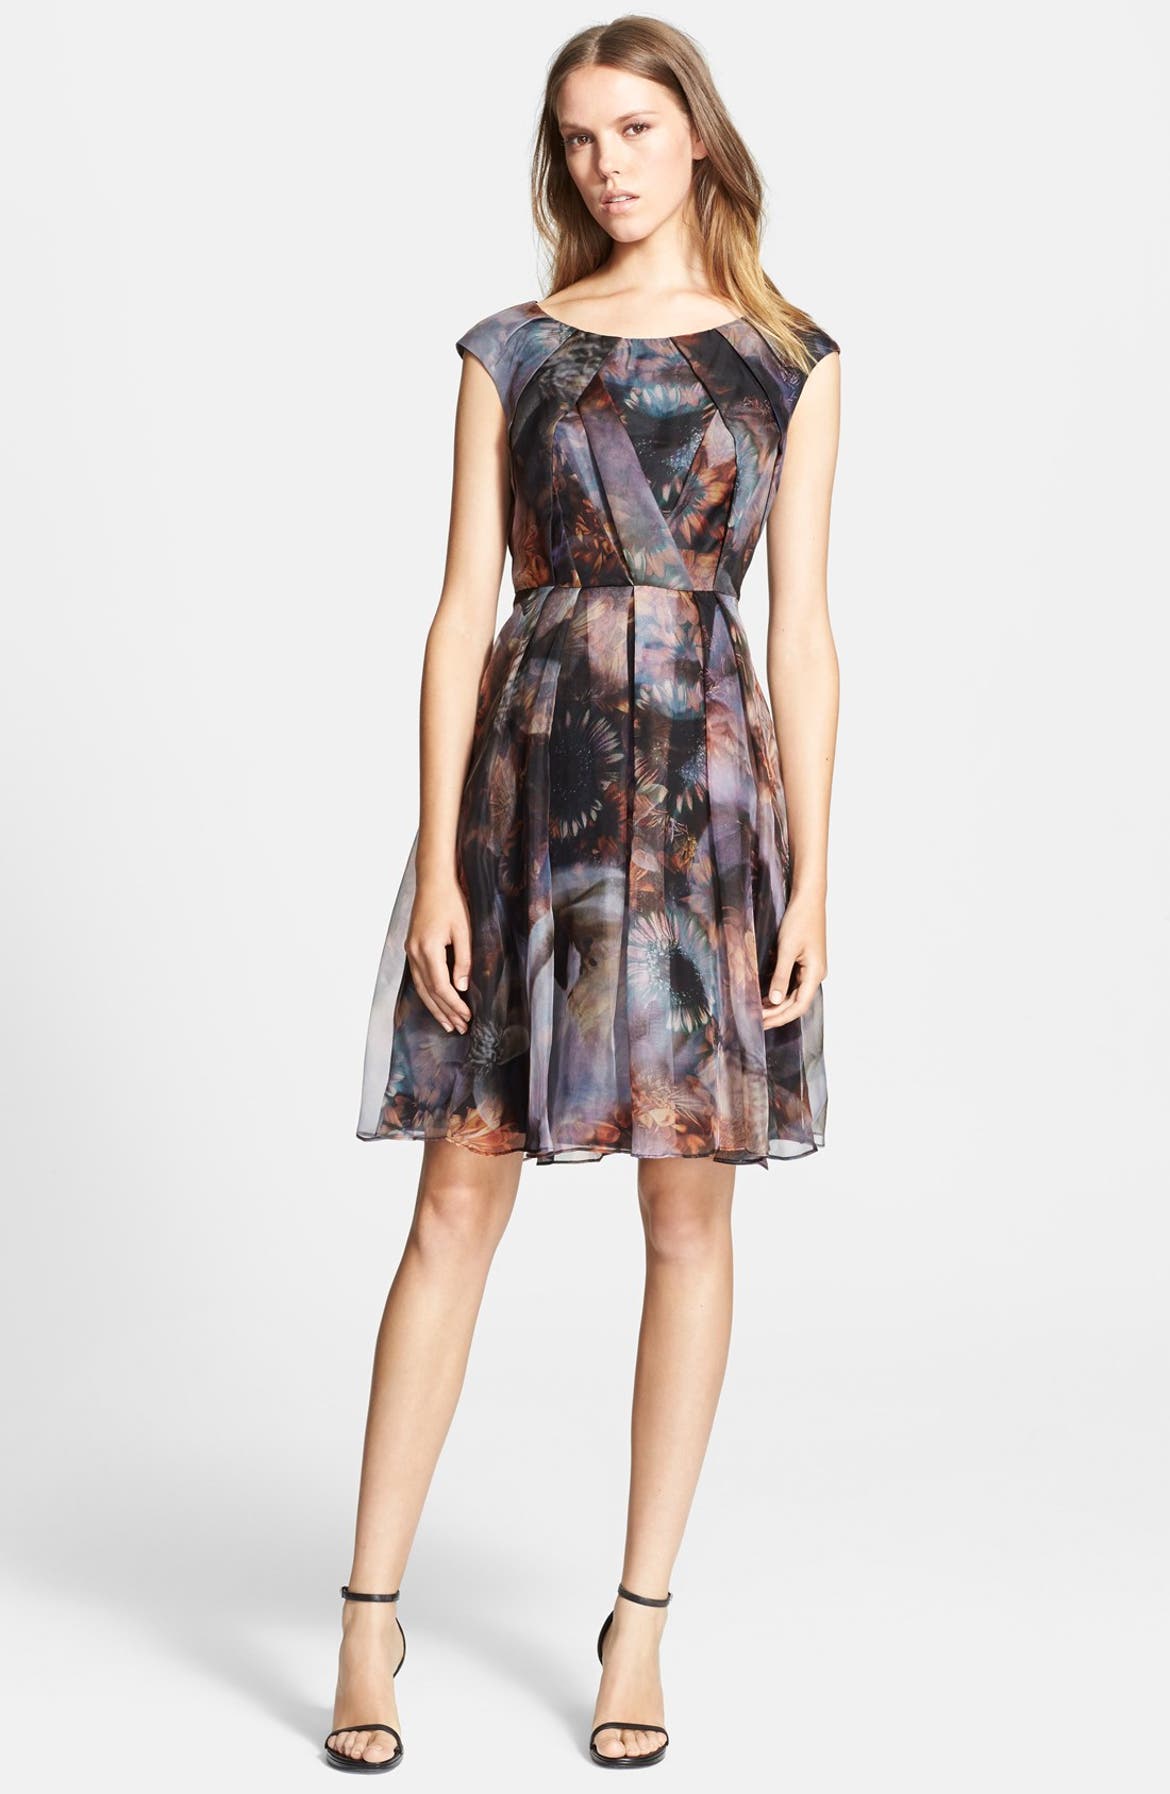 Ted Baker London 'Blooms of Enchantment' Fit & Flare Dress | Nordstrom